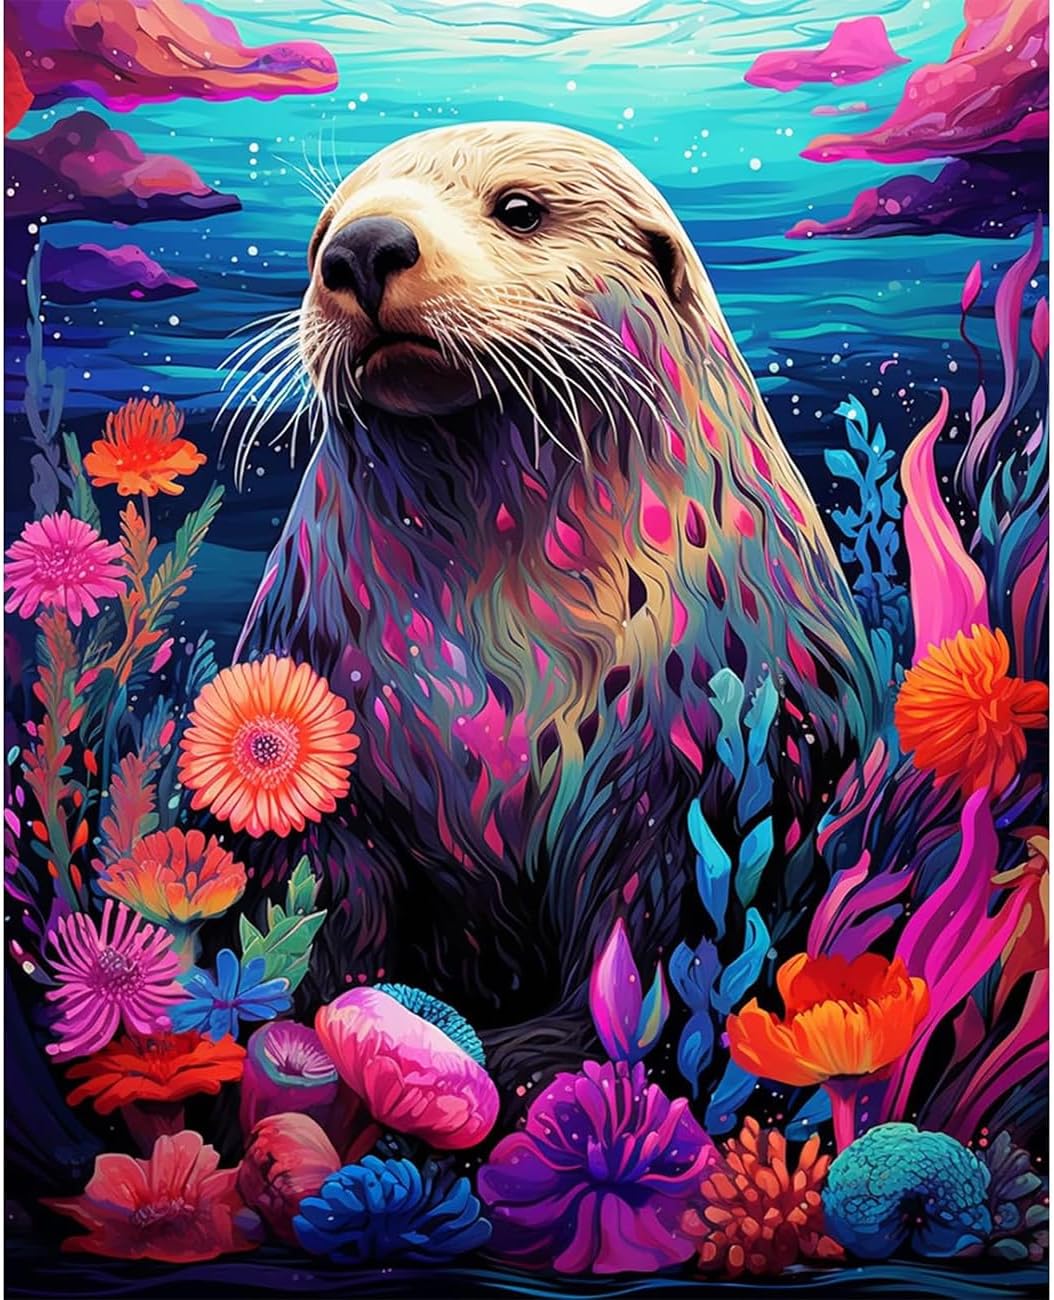 Adult Diamond Painting Kits: Adorable Seal Dog Beginner-Friendly DIY Kits for 5D Diamond Art Complete Drill Diamond Points Crystal Craft Kits for Wall Art and Bedroom D&#xE9;cor at Home: Presents 11.8 by 15.7 inches